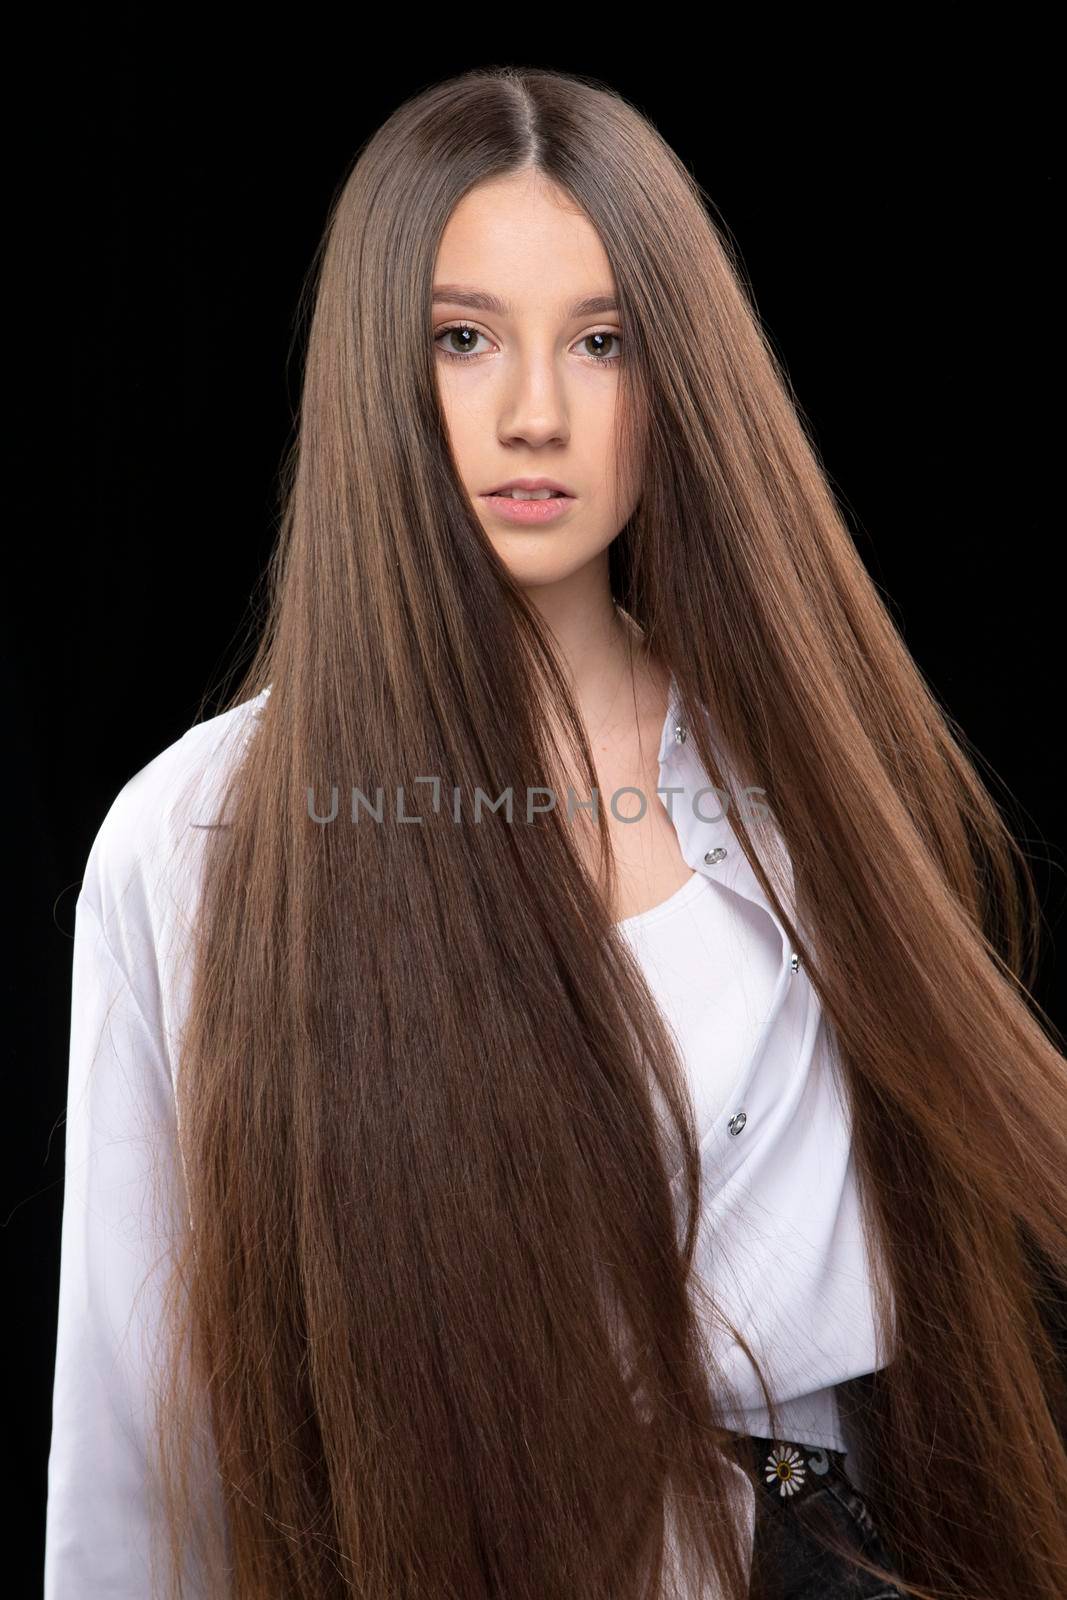 Vertical portrait of a beautiful girl with very long luxurious hair on a dark background.